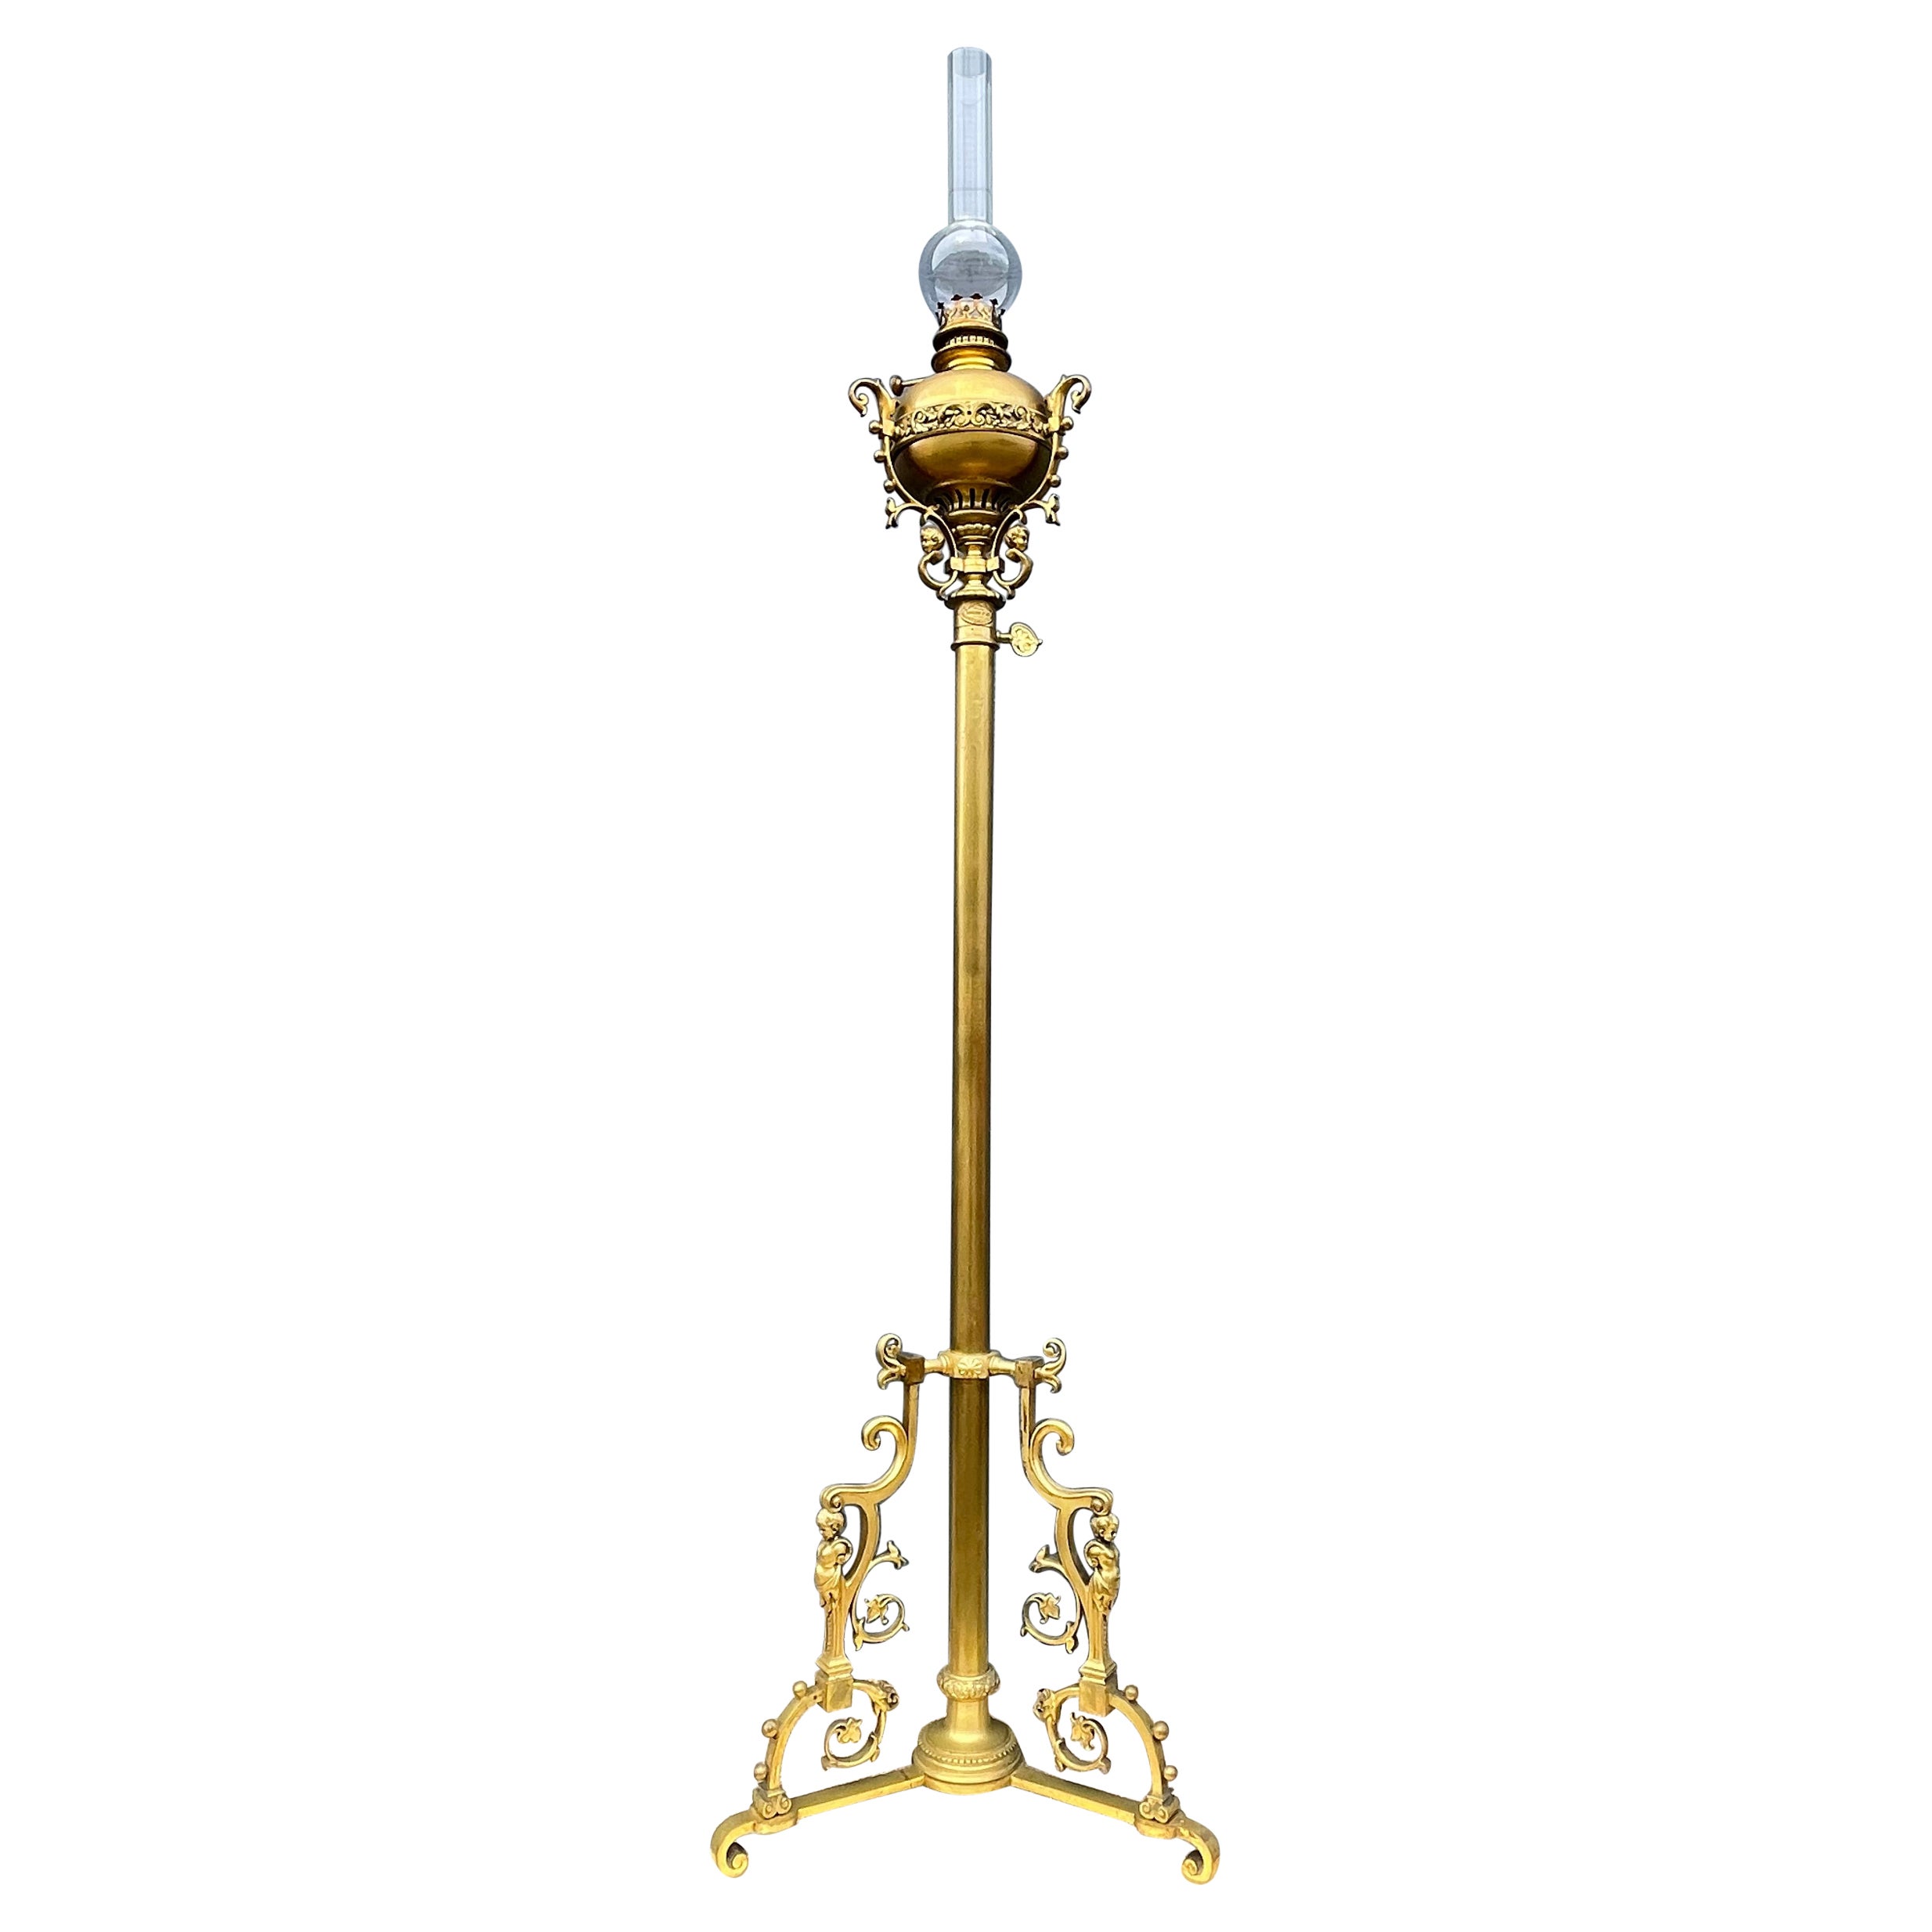 Stunning 19th Century Empire Revival Bronze & Glass Oil Floor Lamp By H. Luppens